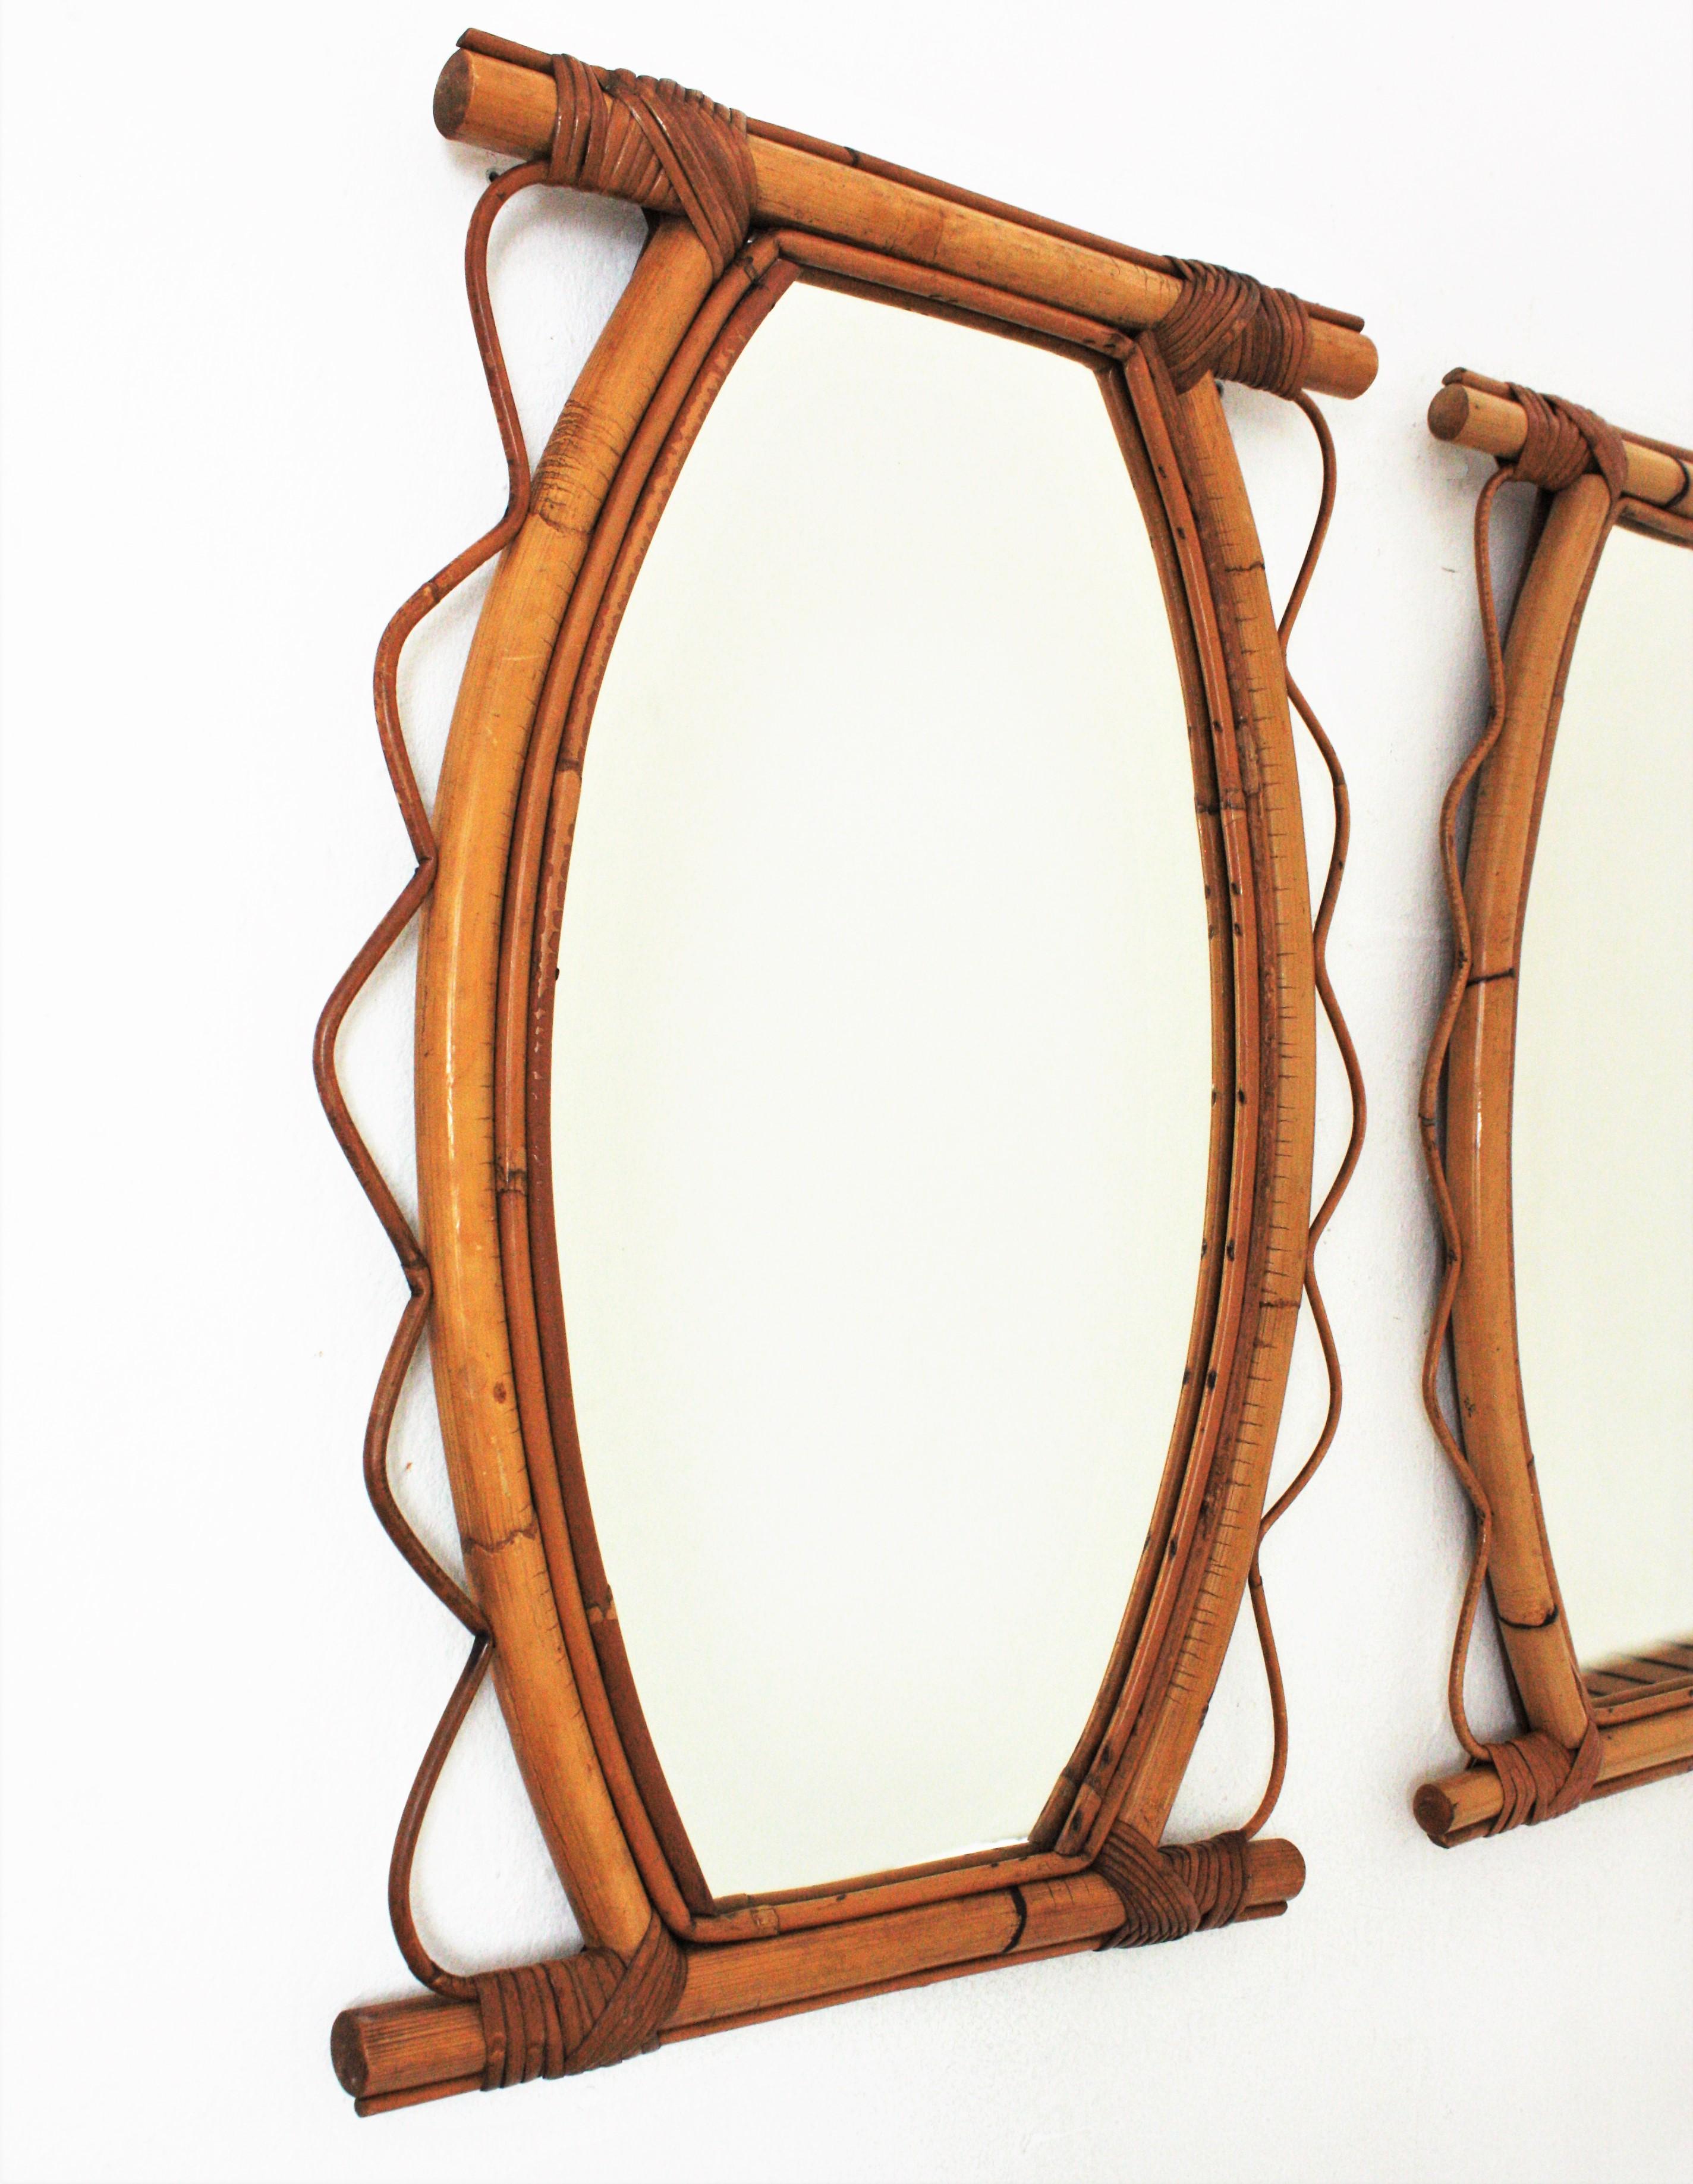 Hand-Crafted Pair of French Riviera Rattan Mirrors, 1950s